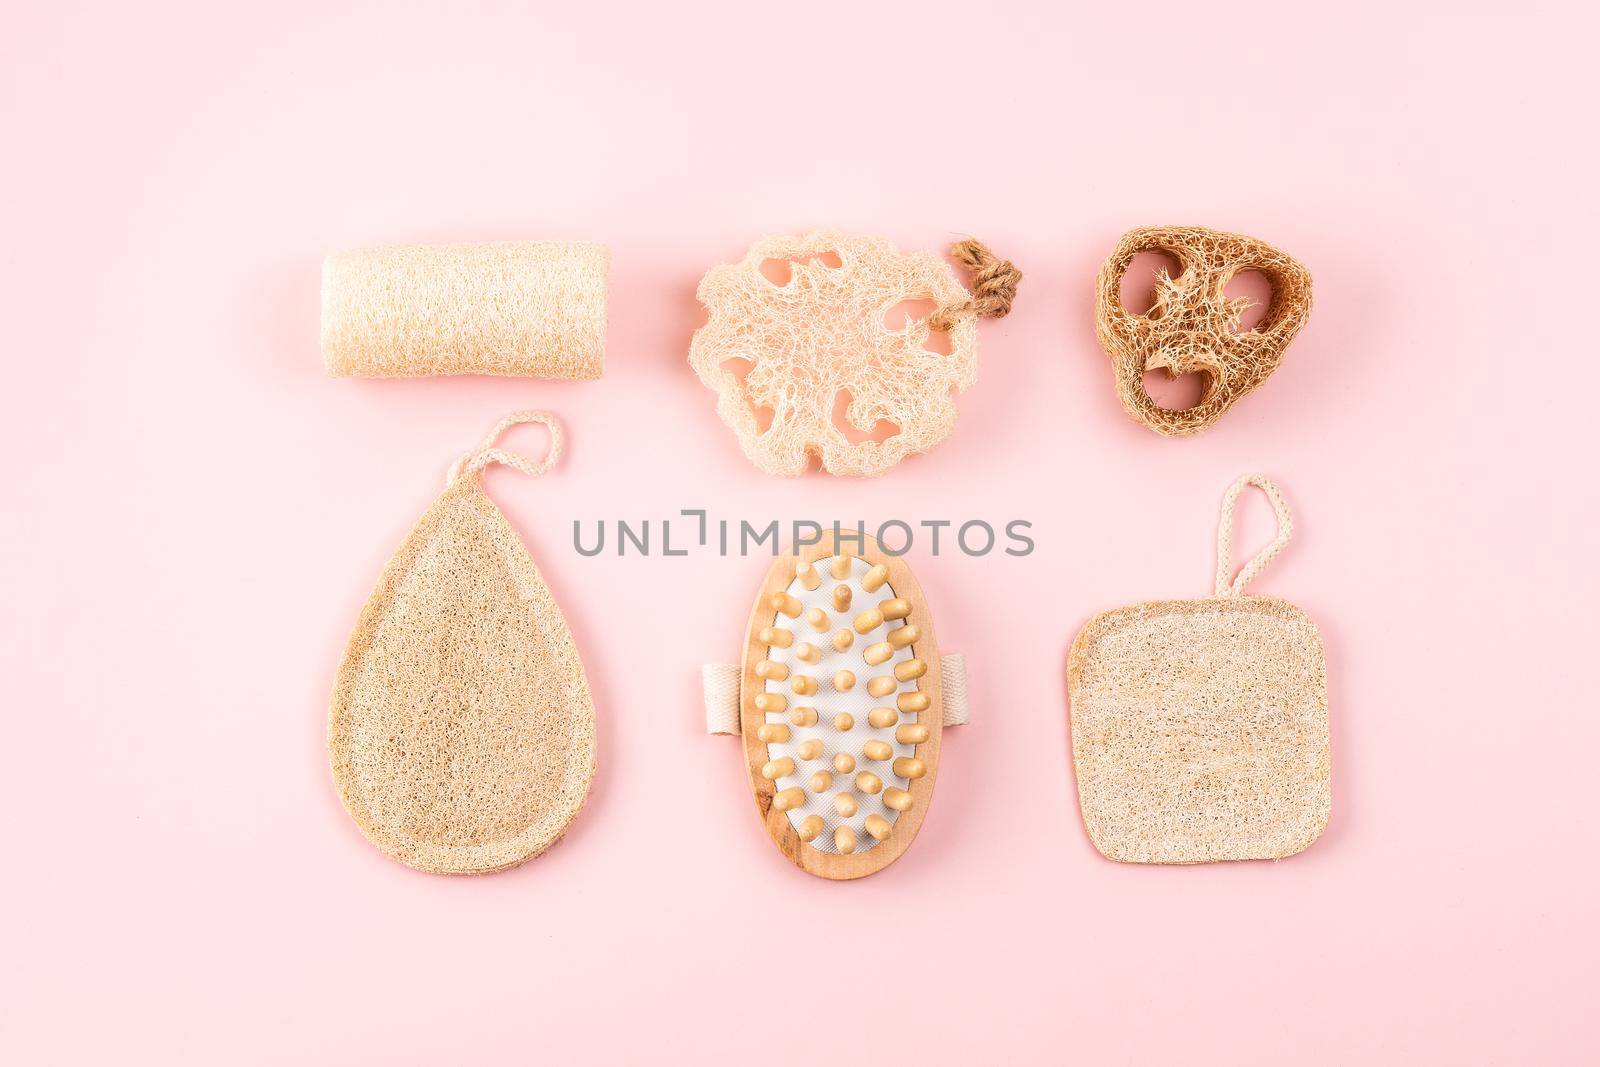 Bathroom accessories, natural loofah sponge, wooden brush on pink background. Zero waste and plastic free concept, sustainable bathroom and lifestyle. by photolime